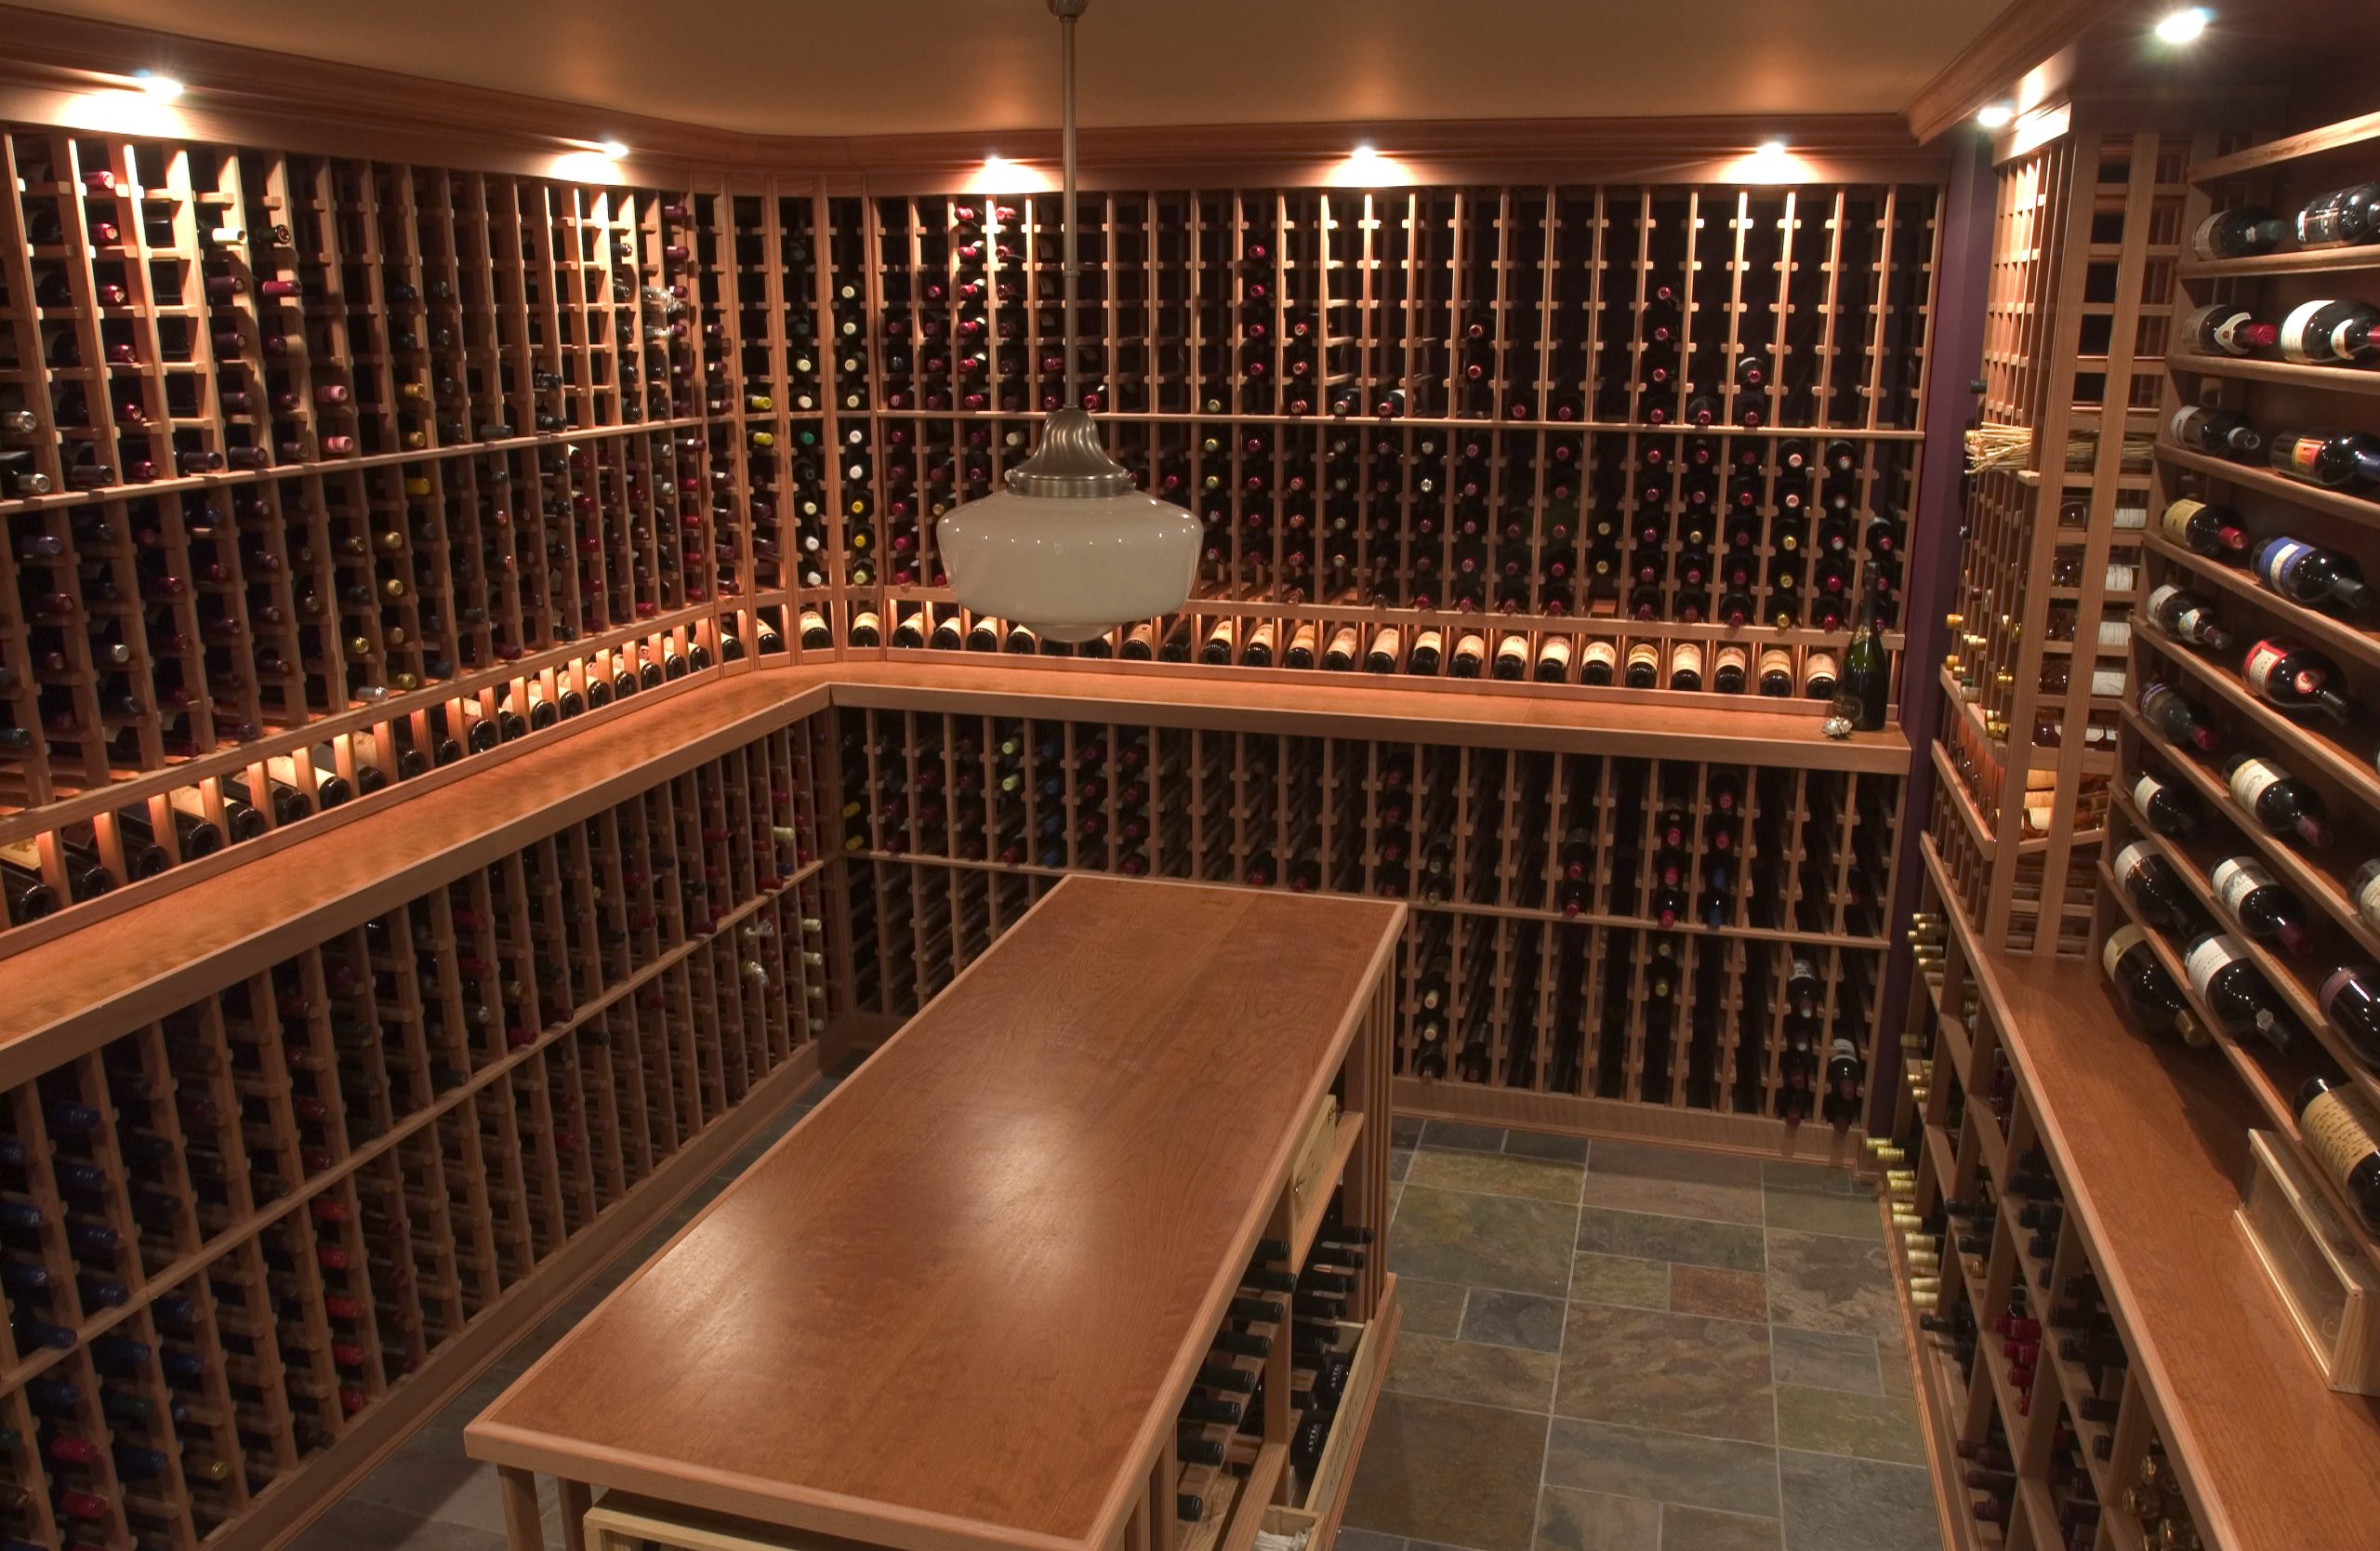 Hand-crafted wooden home wine cellar.